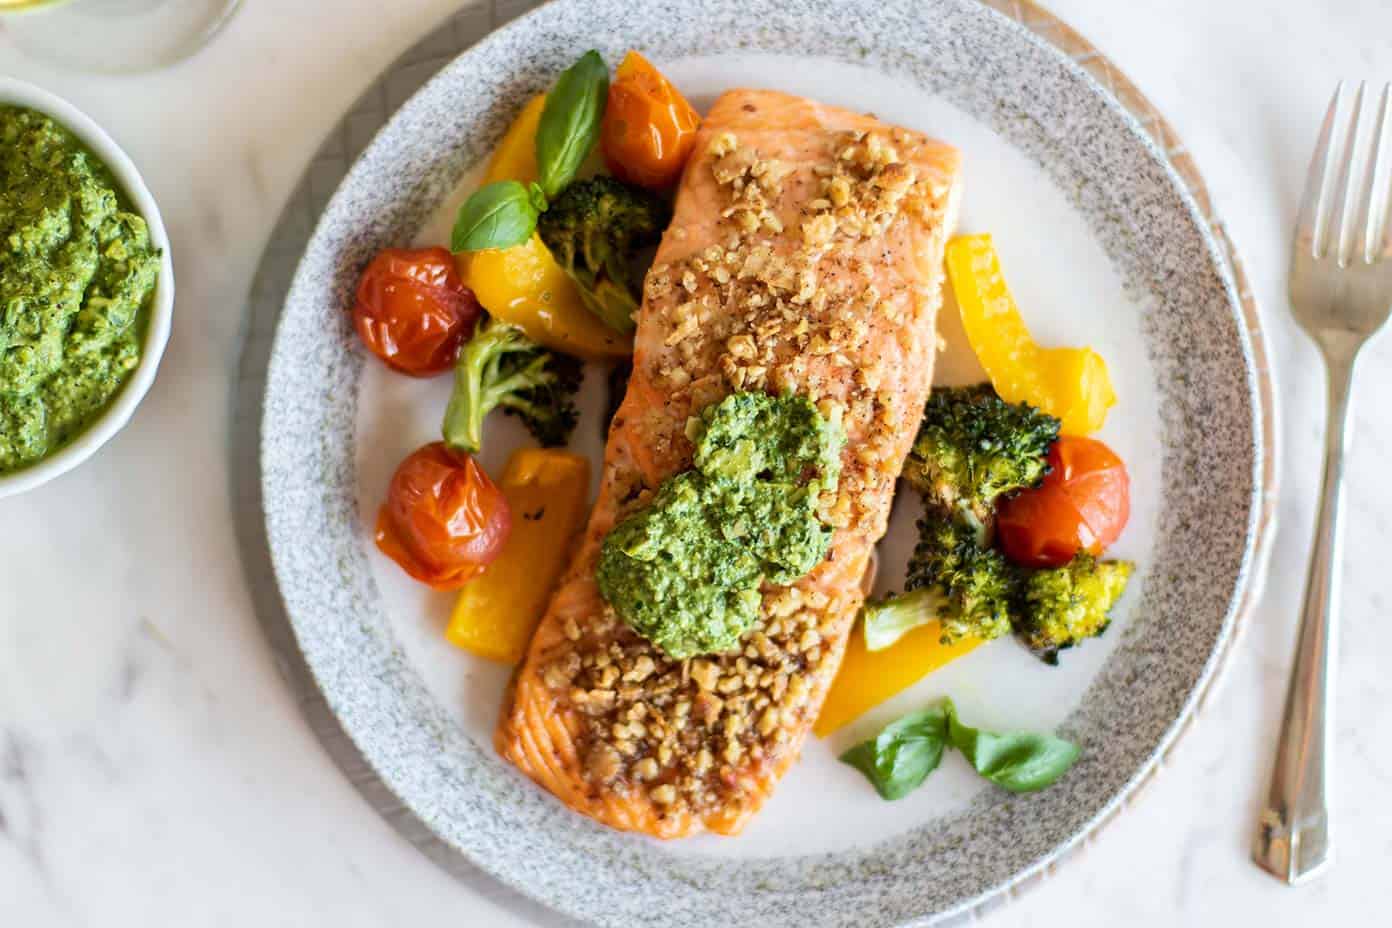 Baked Pesto Salmon - Healthy Salmon with Pesto and a Parmesan Crust